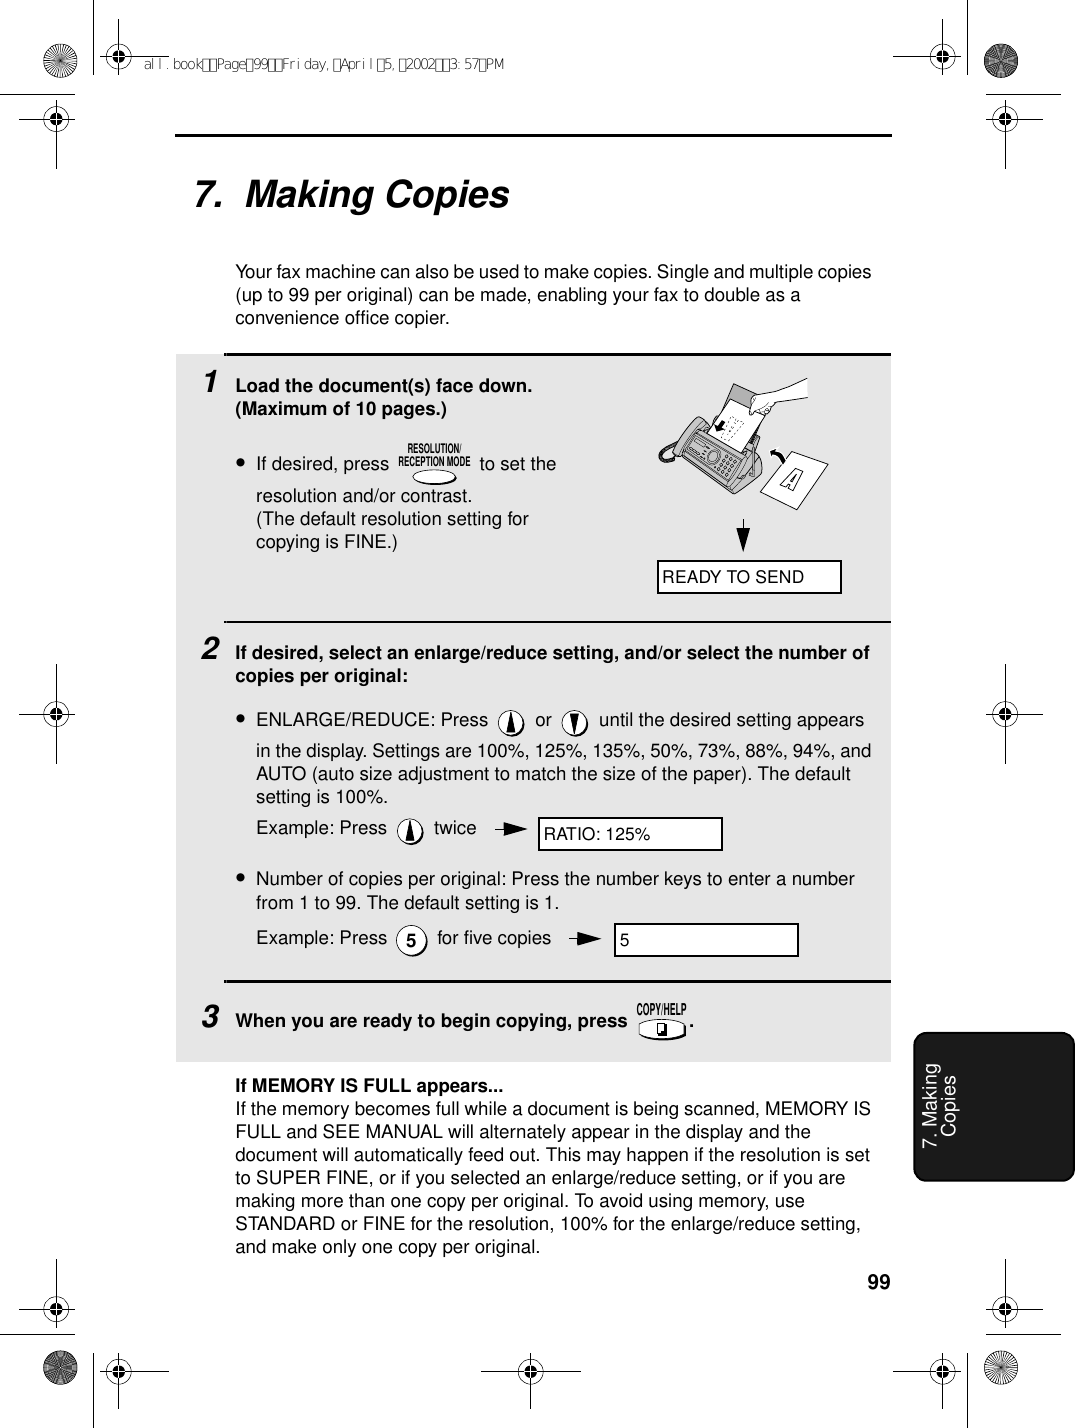 997. MakingCopies7.  Making CopiesYour fax machine can also be used to make copies. Single and multiple copies (up to 99 per original) can be made, enabling your fax to double as a convenience office copier. 1Load the document(s) face down. (Maximum of 10 pages.)•If desired, press   to set the resolution and/or contrast. (The default resolution setting for copying is FINE.)2If desired, select an enlarge/reduce setting, and/or select the number of copies per original:•ENLARGE/REDUCE: Press   or   until the desired setting appears in the display. Settings are 100%, 125%, 135%, 50%, 73%, 88%, 94%, and AUTO (auto size adjustment to match the size of the paper). The default setting is 100%.Example: Press   twice•Number of copies per original: Press the number keys to enter a number from 1 to 99. The default setting is 1.Example: Press   for five copies3When you are ready to begin copying, press  .RESOLUTION/RECEPTION MODE5COPY/HELPREADY TO SENDRATIO: 125%5If MEMORY IS FULL appears...If the memory becomes full while a document is being scanned, MEMORY IS FULL and SEE MANUAL will alternately appear in the display and the document will automatically feed out. This may happen if the resolution is set to SUPER FINE, or if you selected an enlarge/reduce setting, or if you are making more than one copy per original. To avoid using memory, use STANDARD or FINE for the resolution, 100% for the enlarge/reduce setting, and make only one copy per original.all.bookPage99Friday,April5,20023:57PM